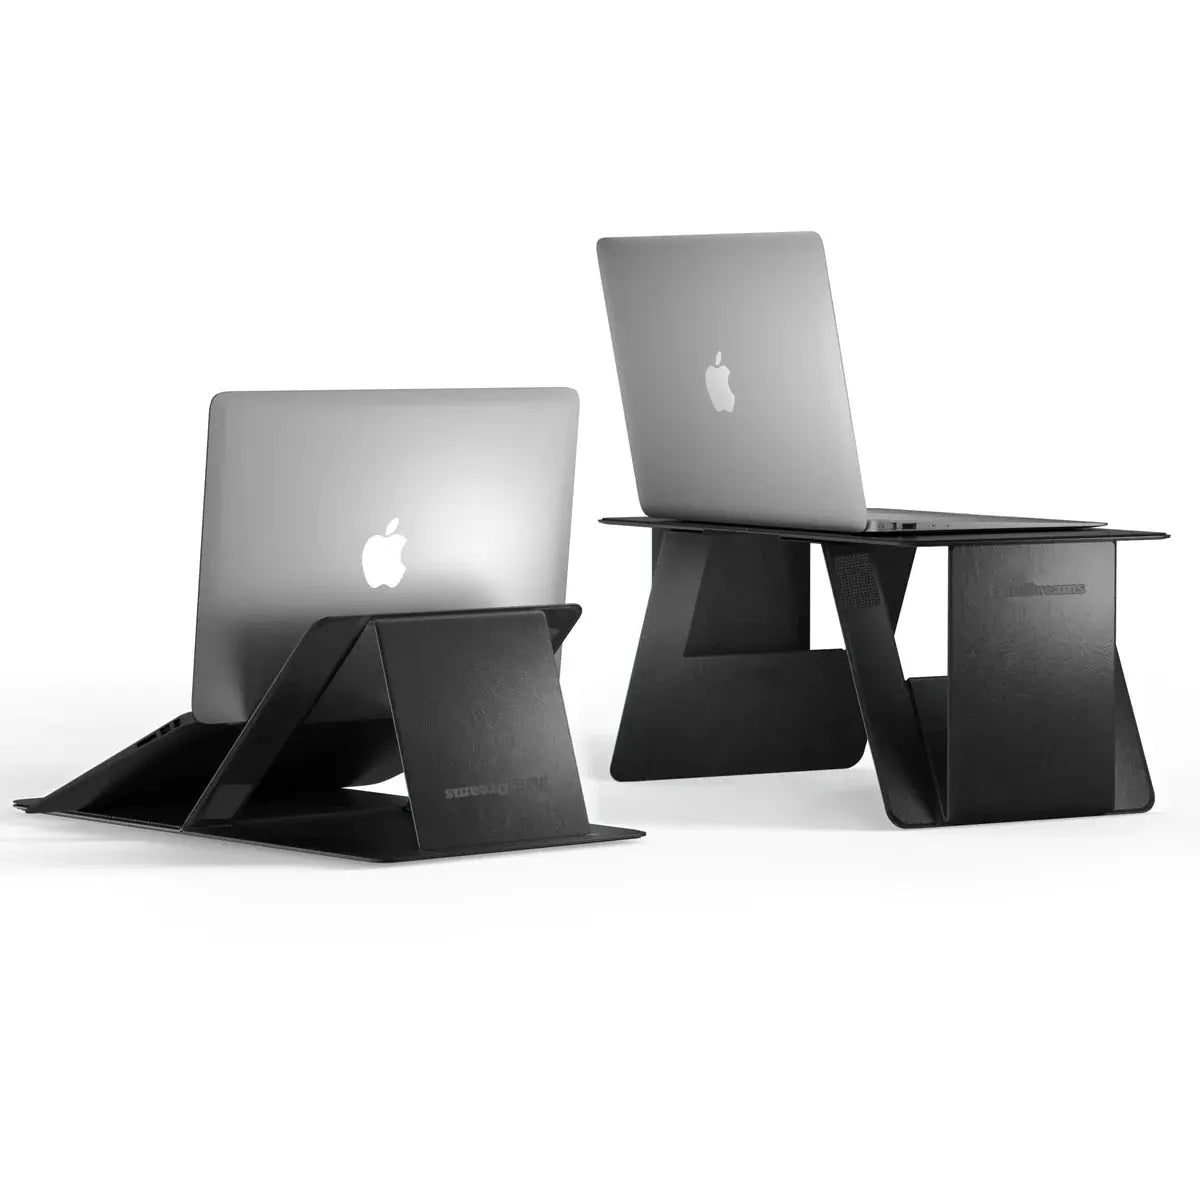 iSwift Pi Paper-Thin Durable Laptop Desk for Bed and Office9